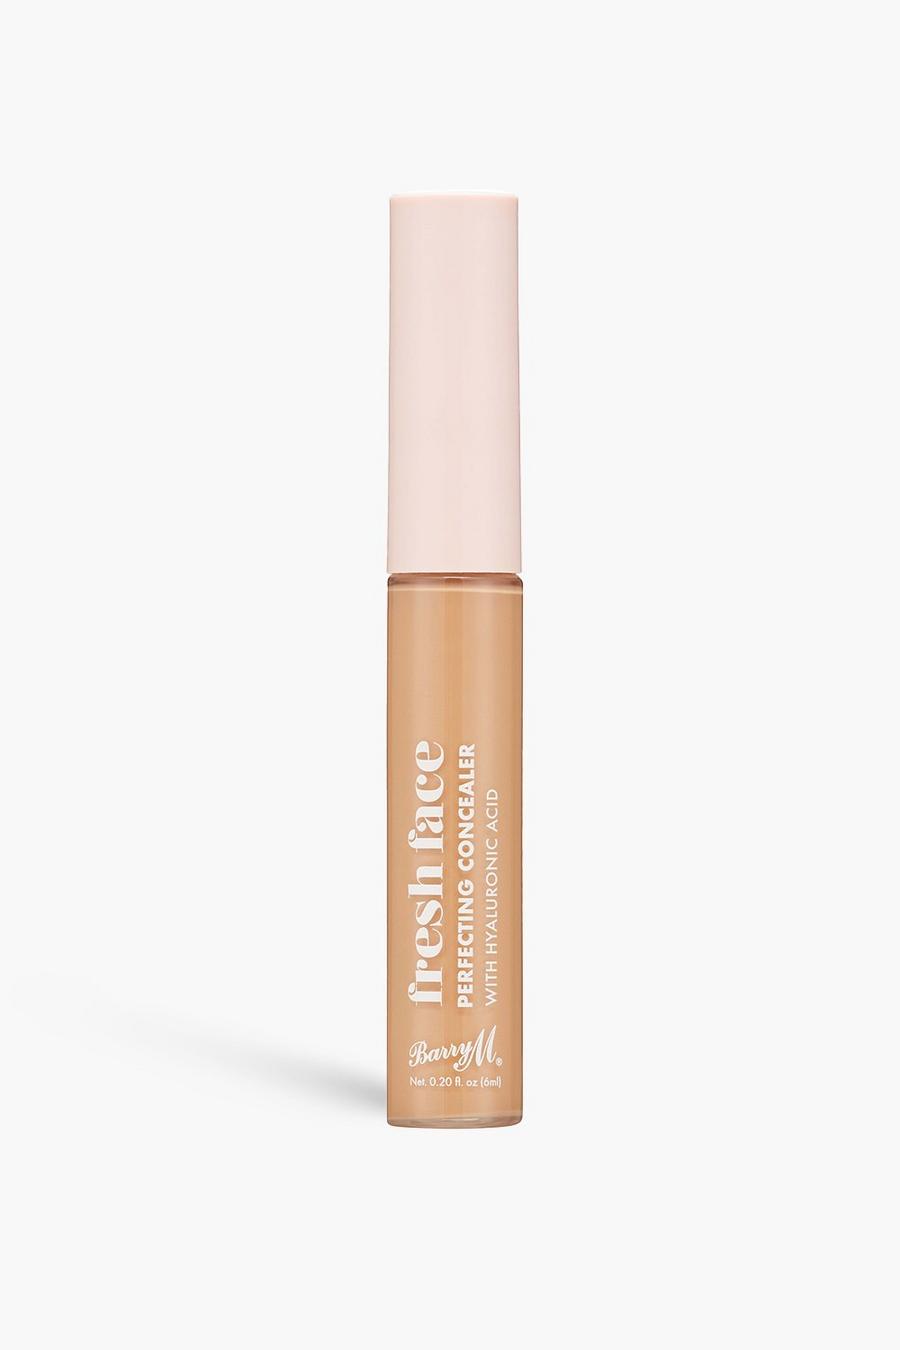 Tan marrone Barry M Fresh Face Perfecting Concealer 6